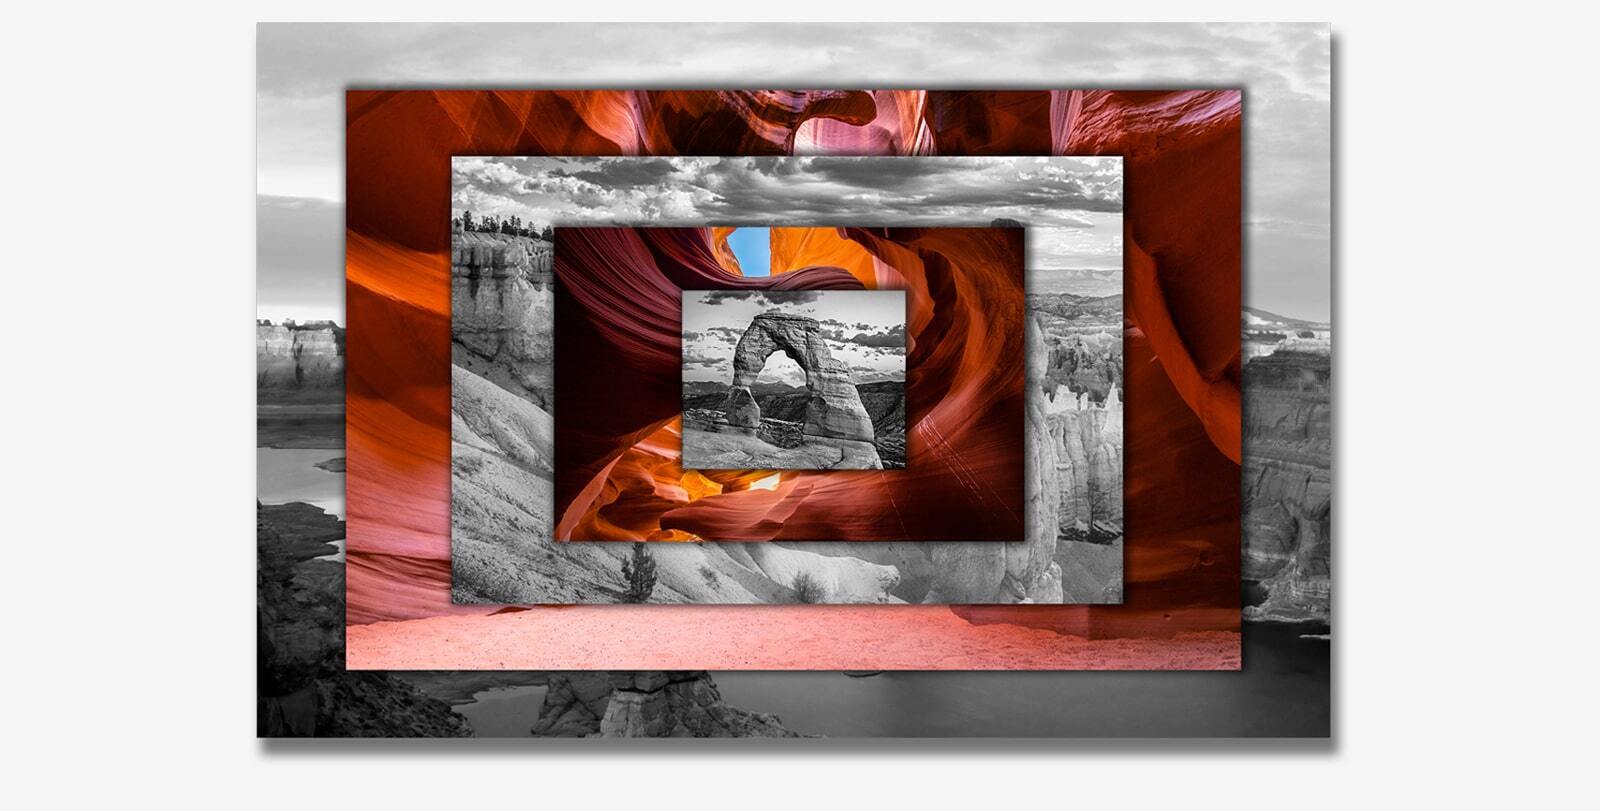 Stretched Canvas Available in Custom Sizes.
Showcase your masterpiece in any size or aspect ratio you need. Custom sizes are available from 8